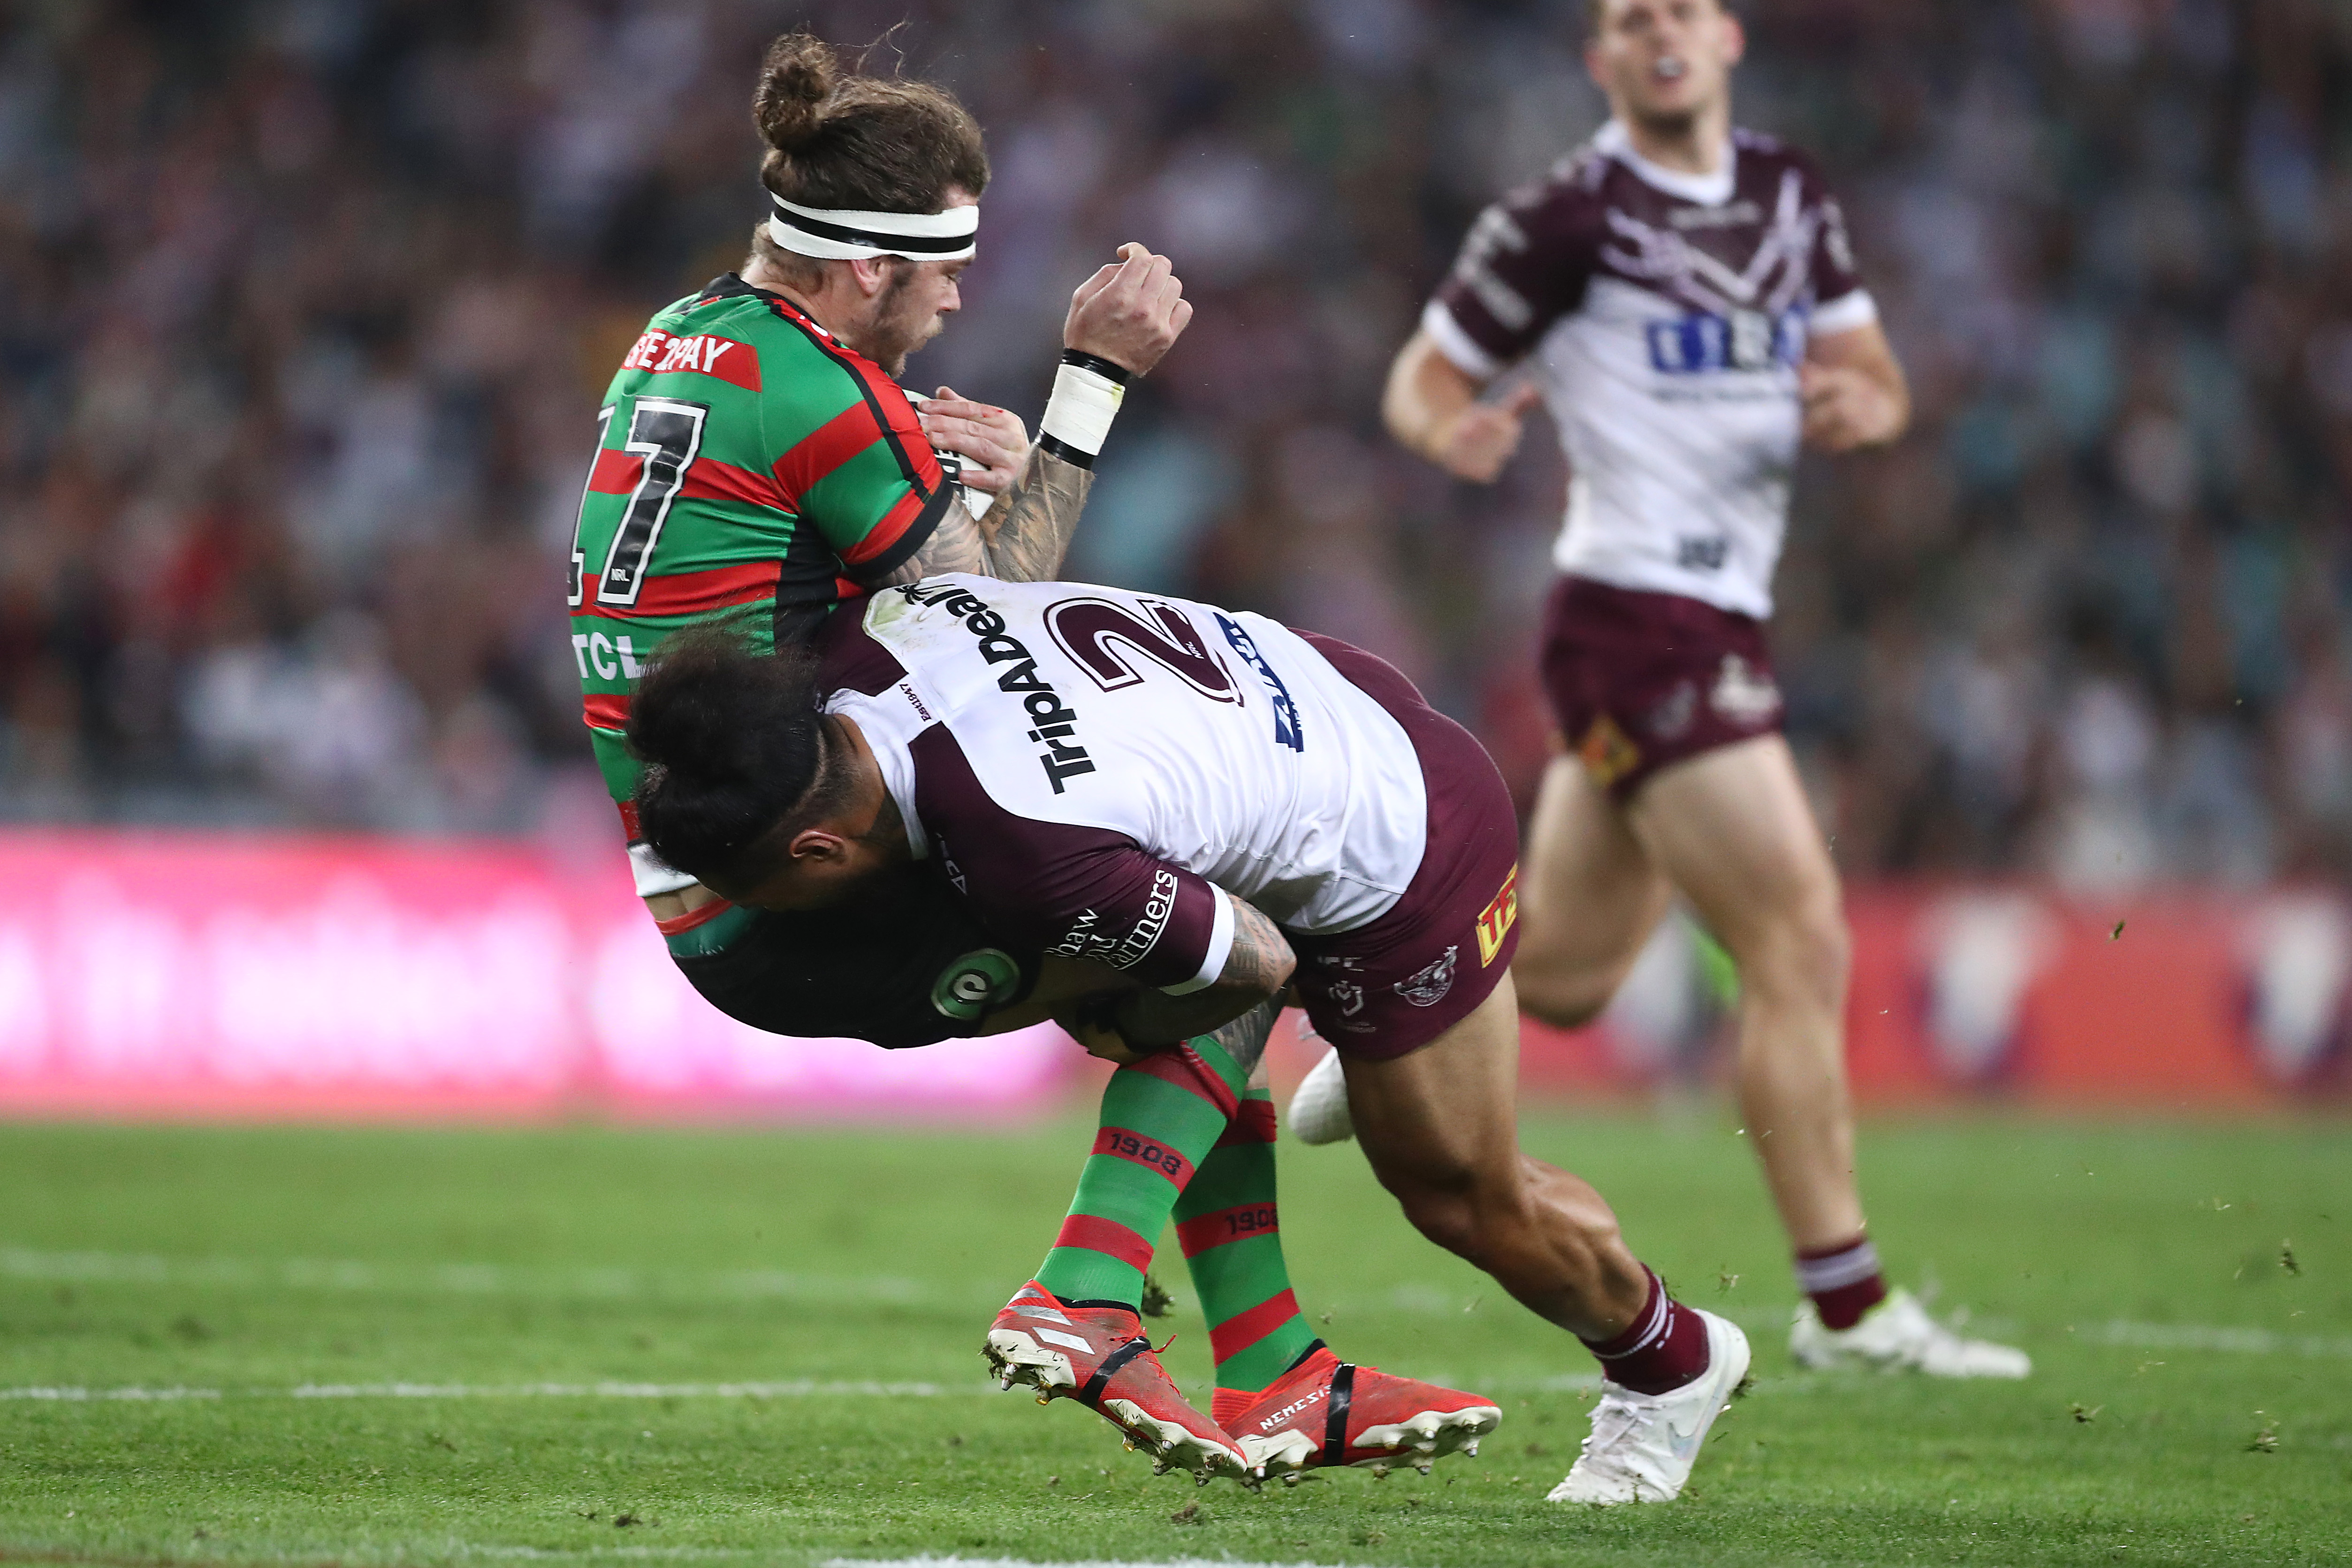 Tolutau Koula of the Sea Eagles is tackled by Cody Walker of the